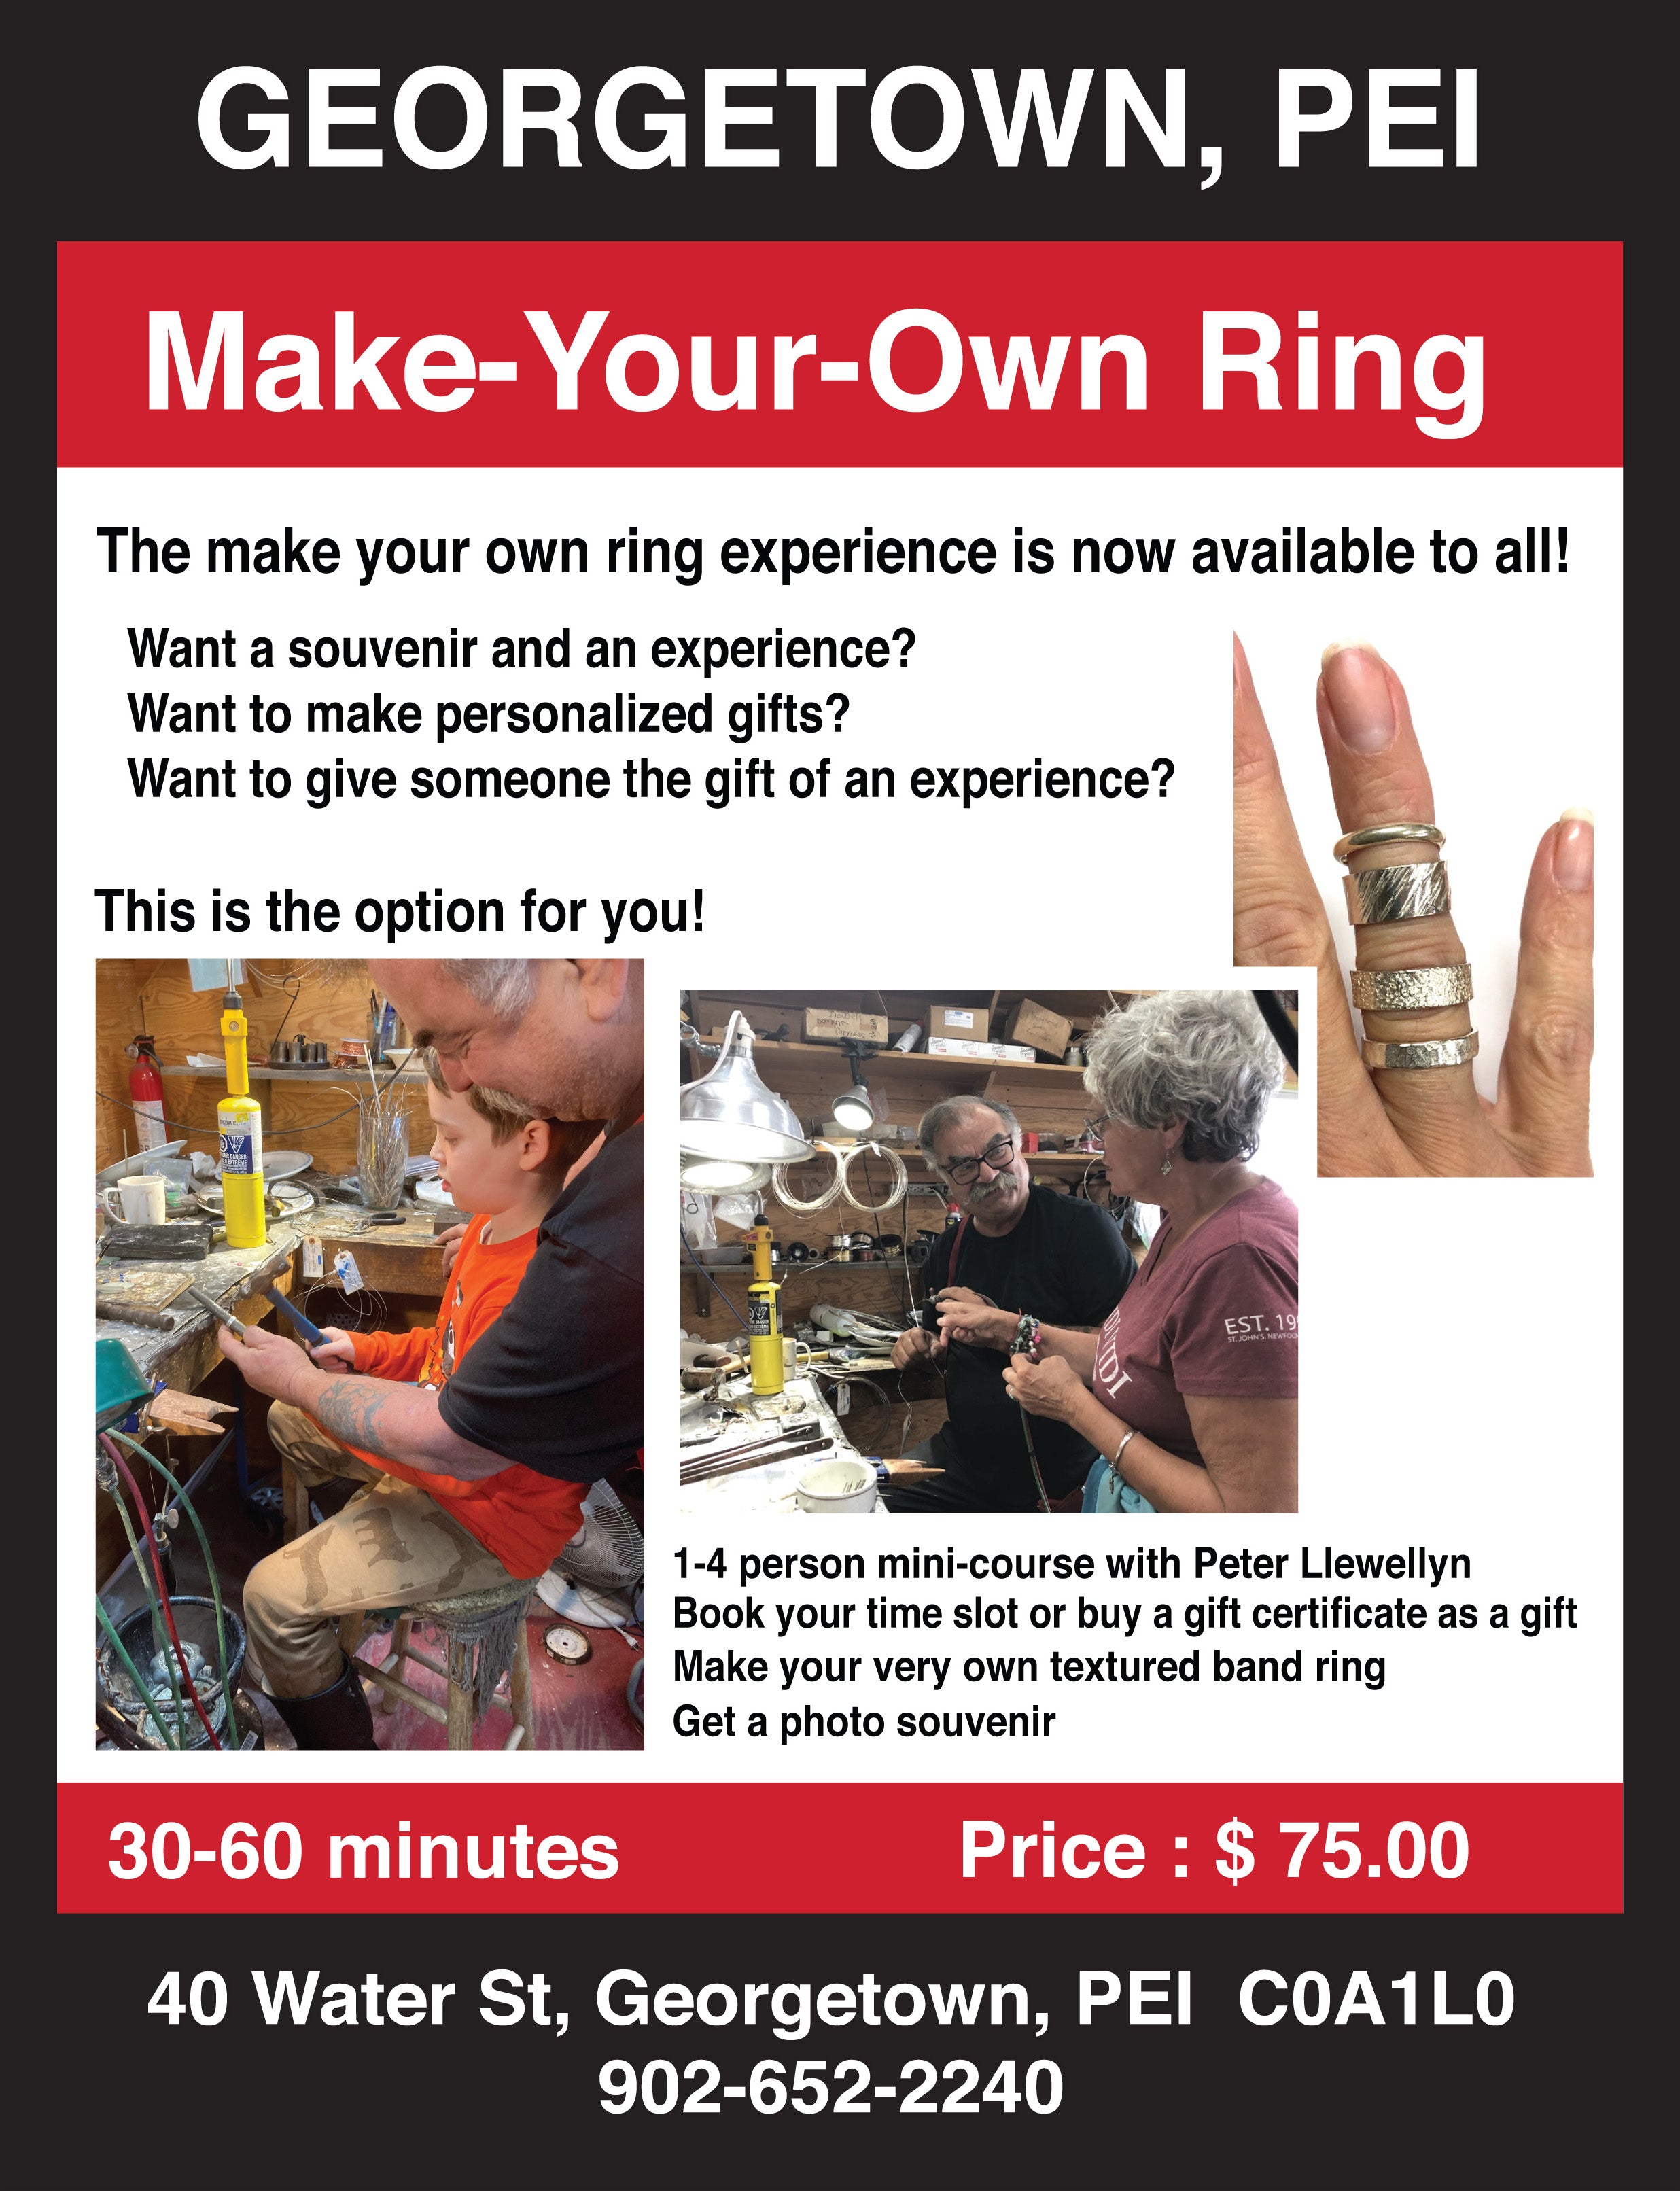 Make Your Own Ring - Georgetown